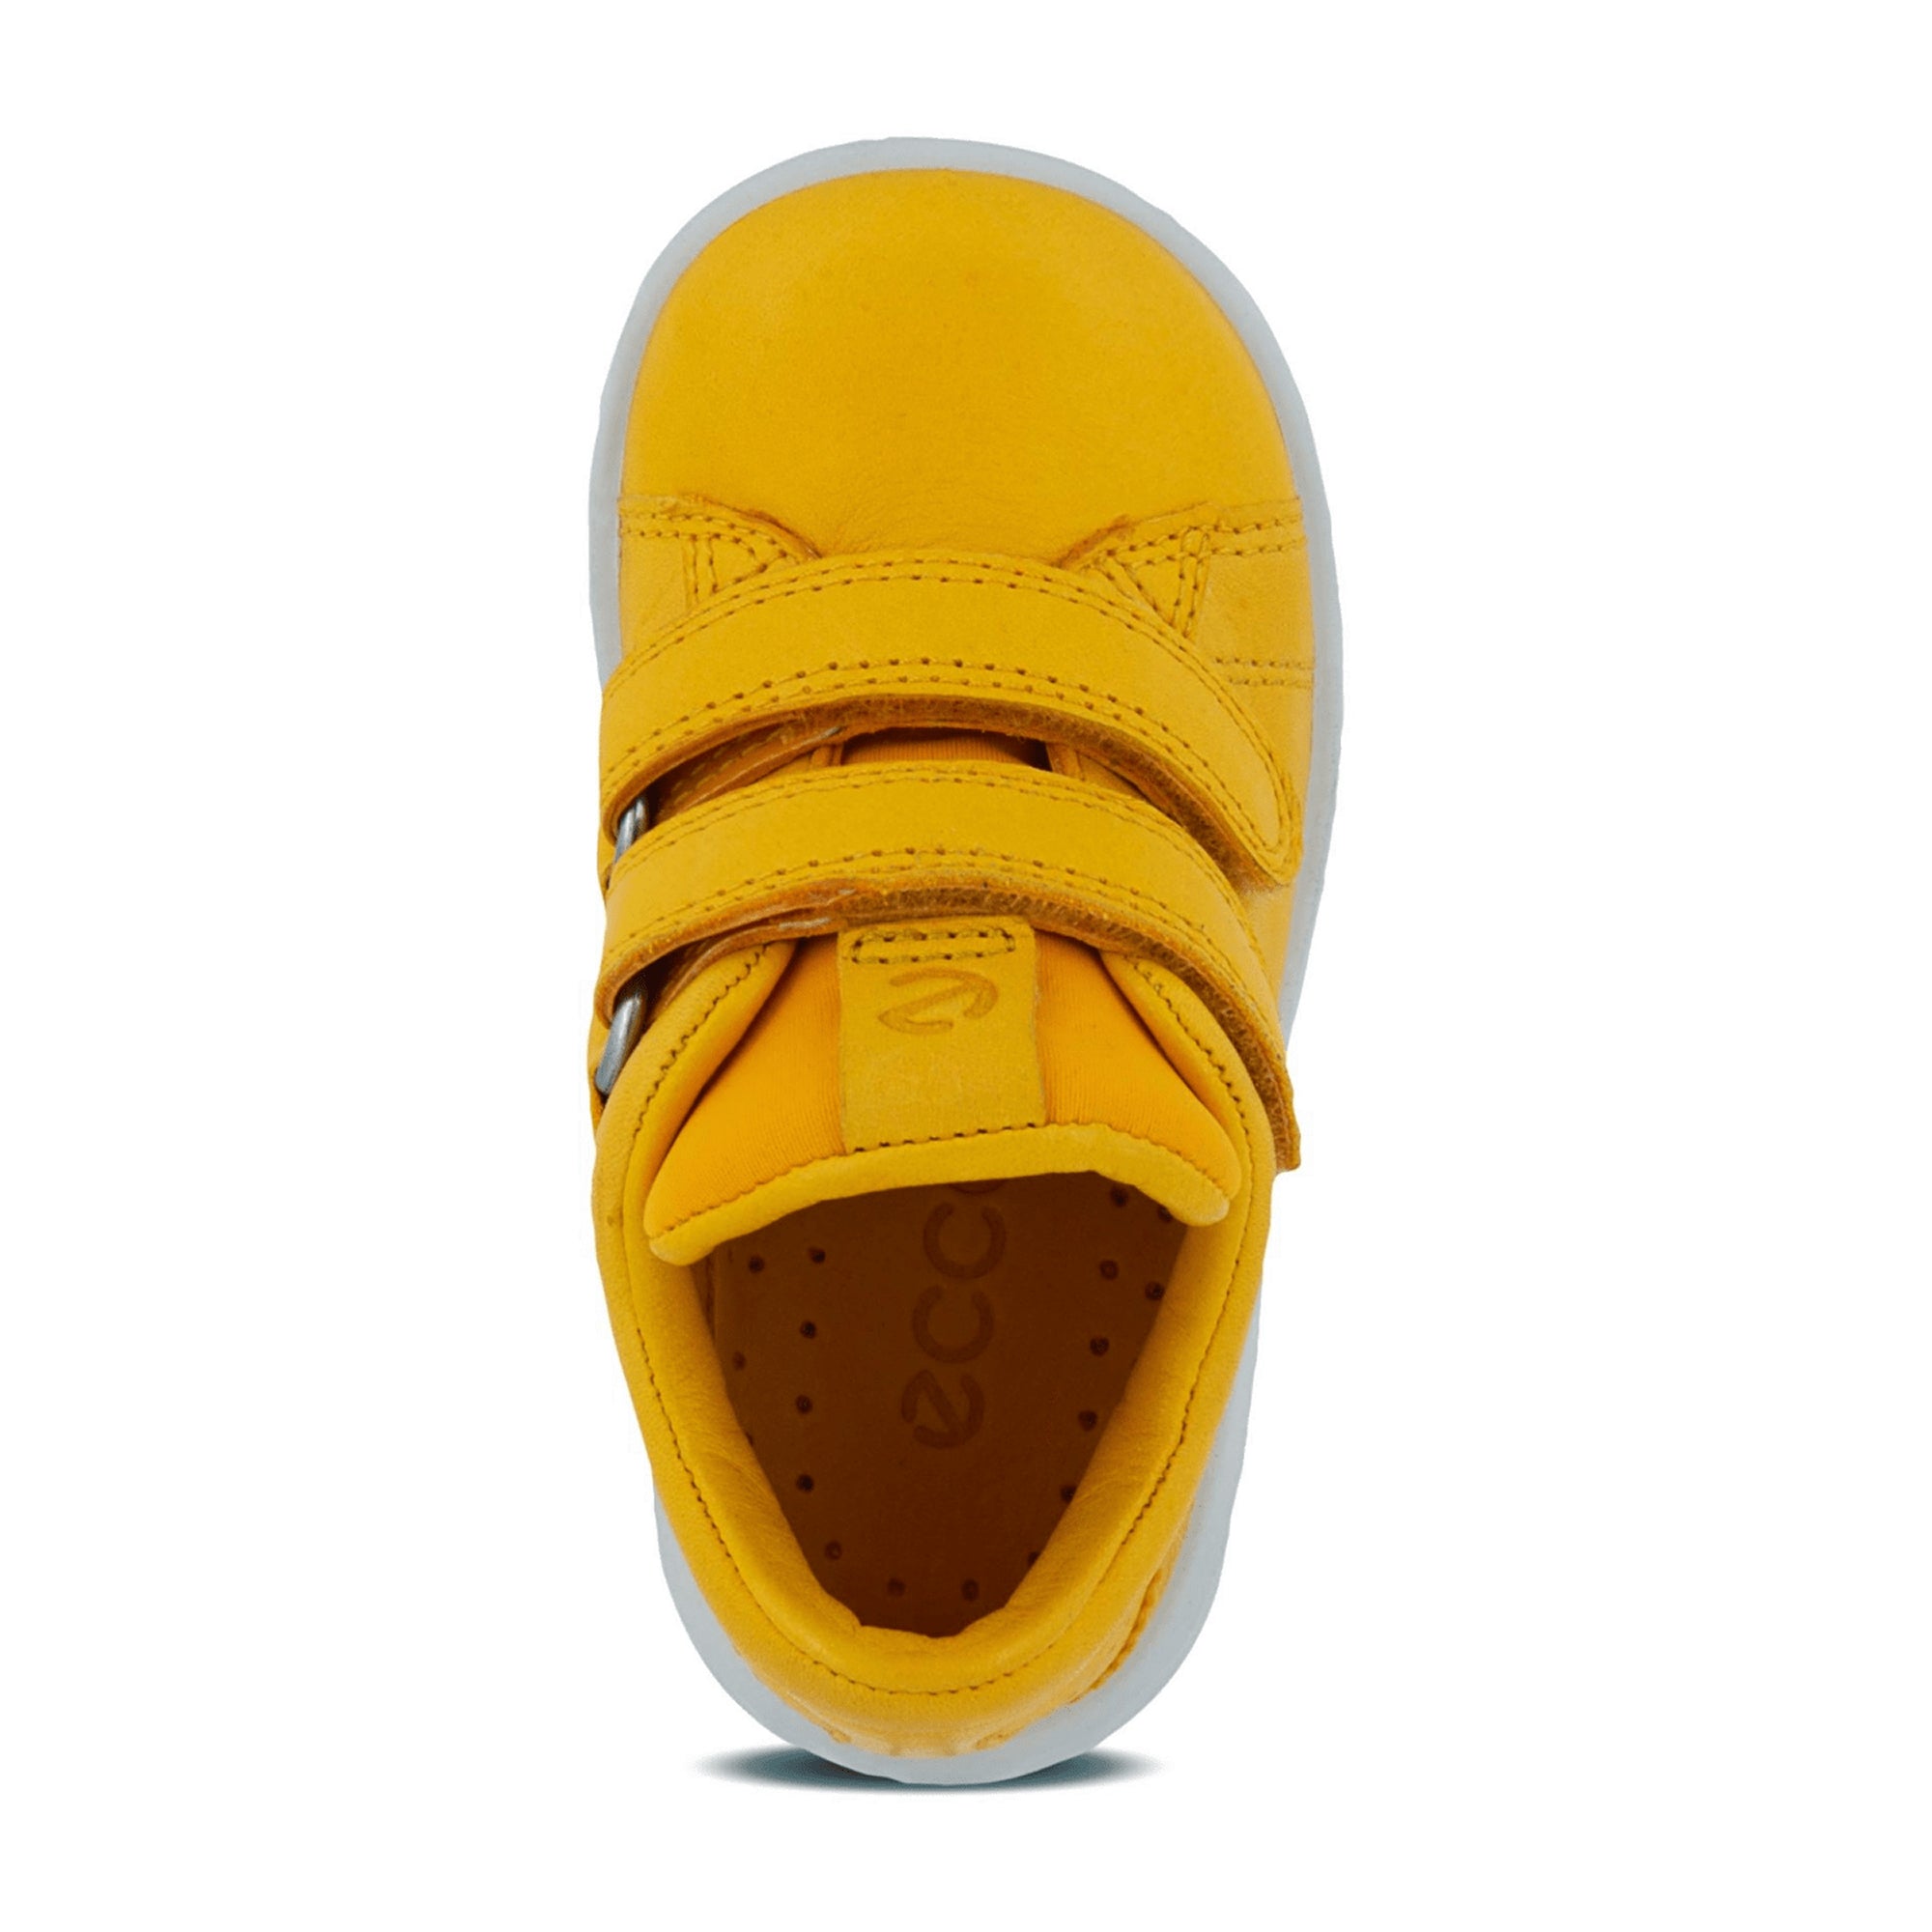 Ecco Kids Yellow Sneakers for Children - Durable & Stylish